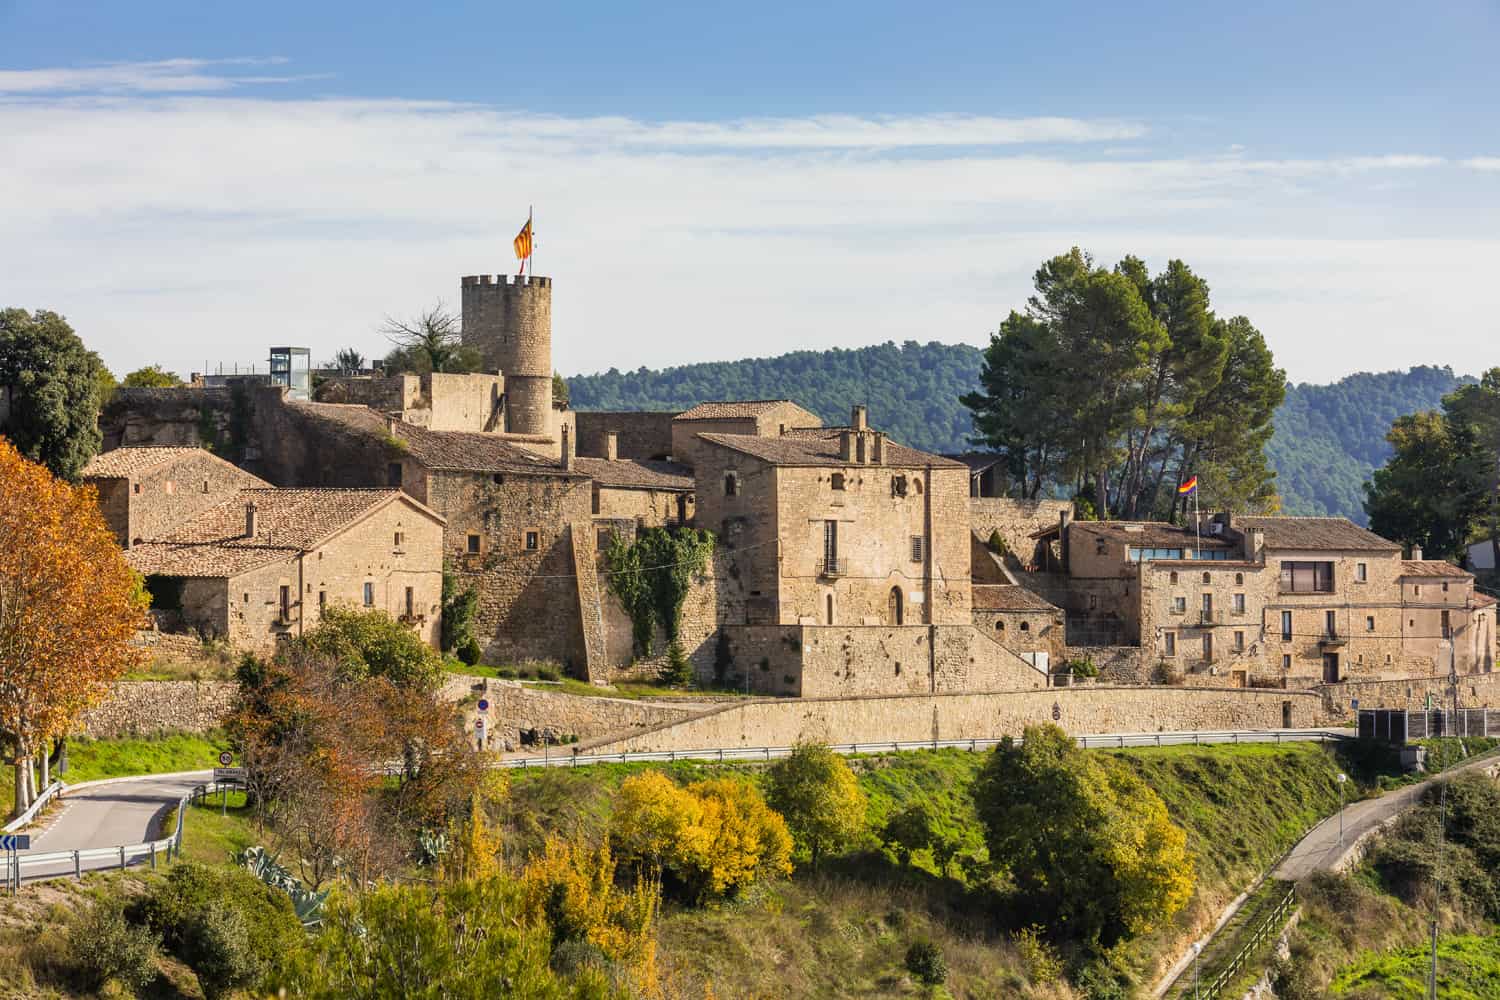 Talamanca, a stroll and beautiful castle 1 hour from Barcelona